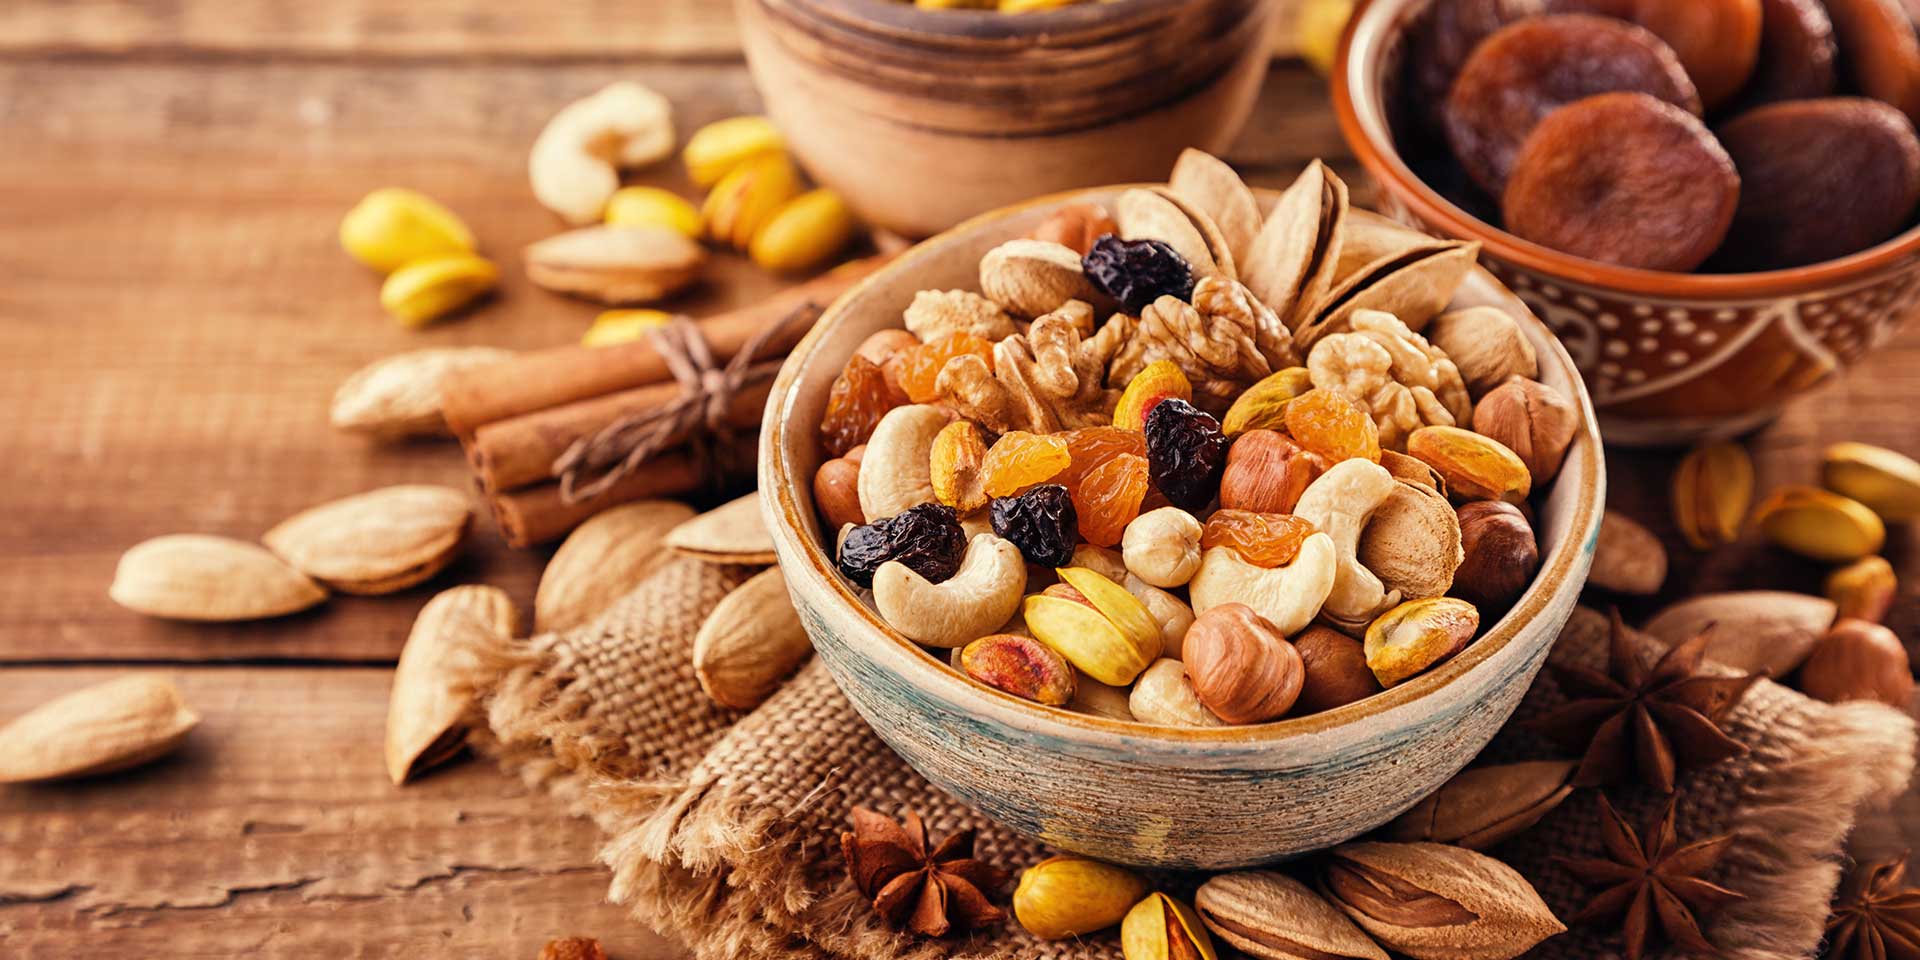 The Health-Boosting Benefits of Each Nut Explained